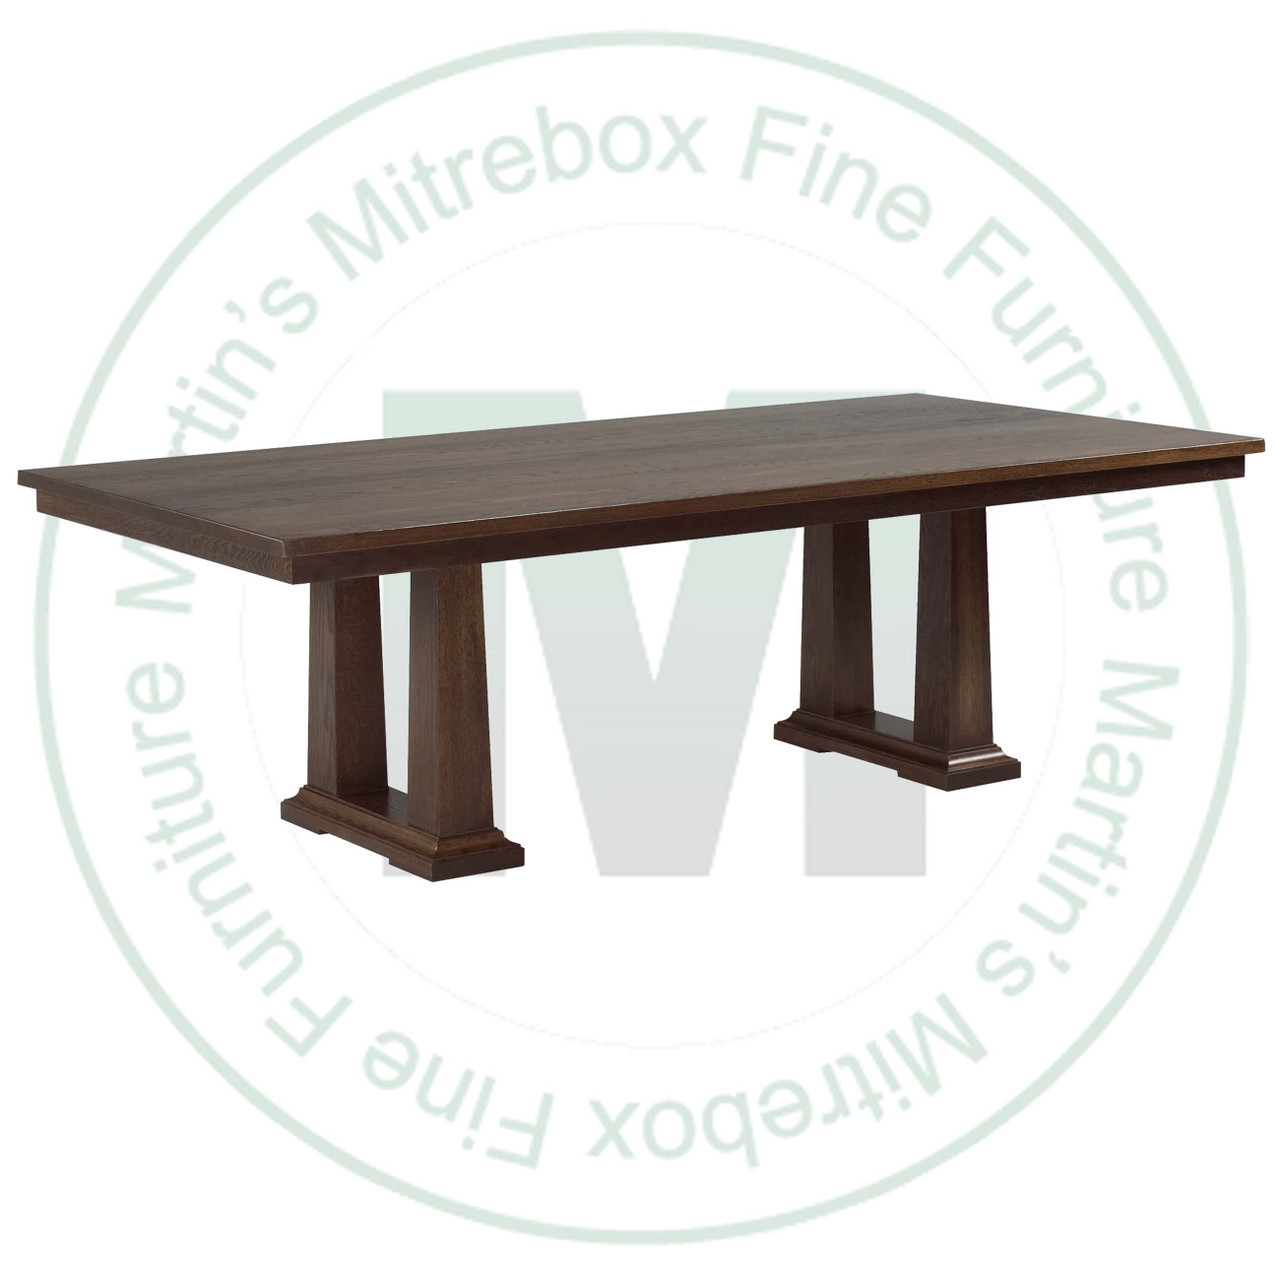 Oak Acropolis Solid Top Double Pedestal Table 54''D x 84''W x 30''H Table Has 1.25'' Thick Top With 16'' Extensions.